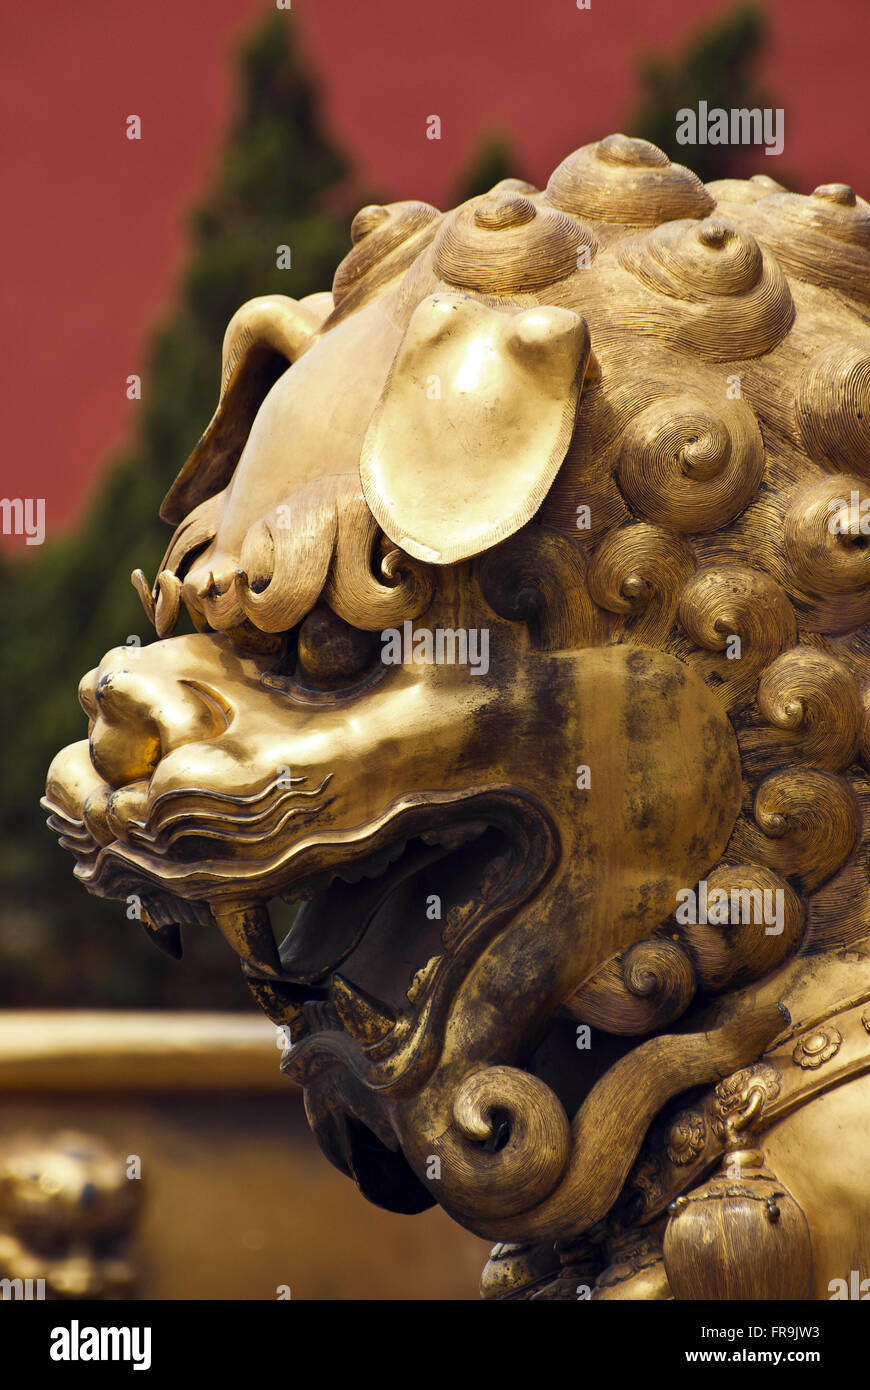 Statue of Chinese imperial lion in Forbidden City Stock Photo